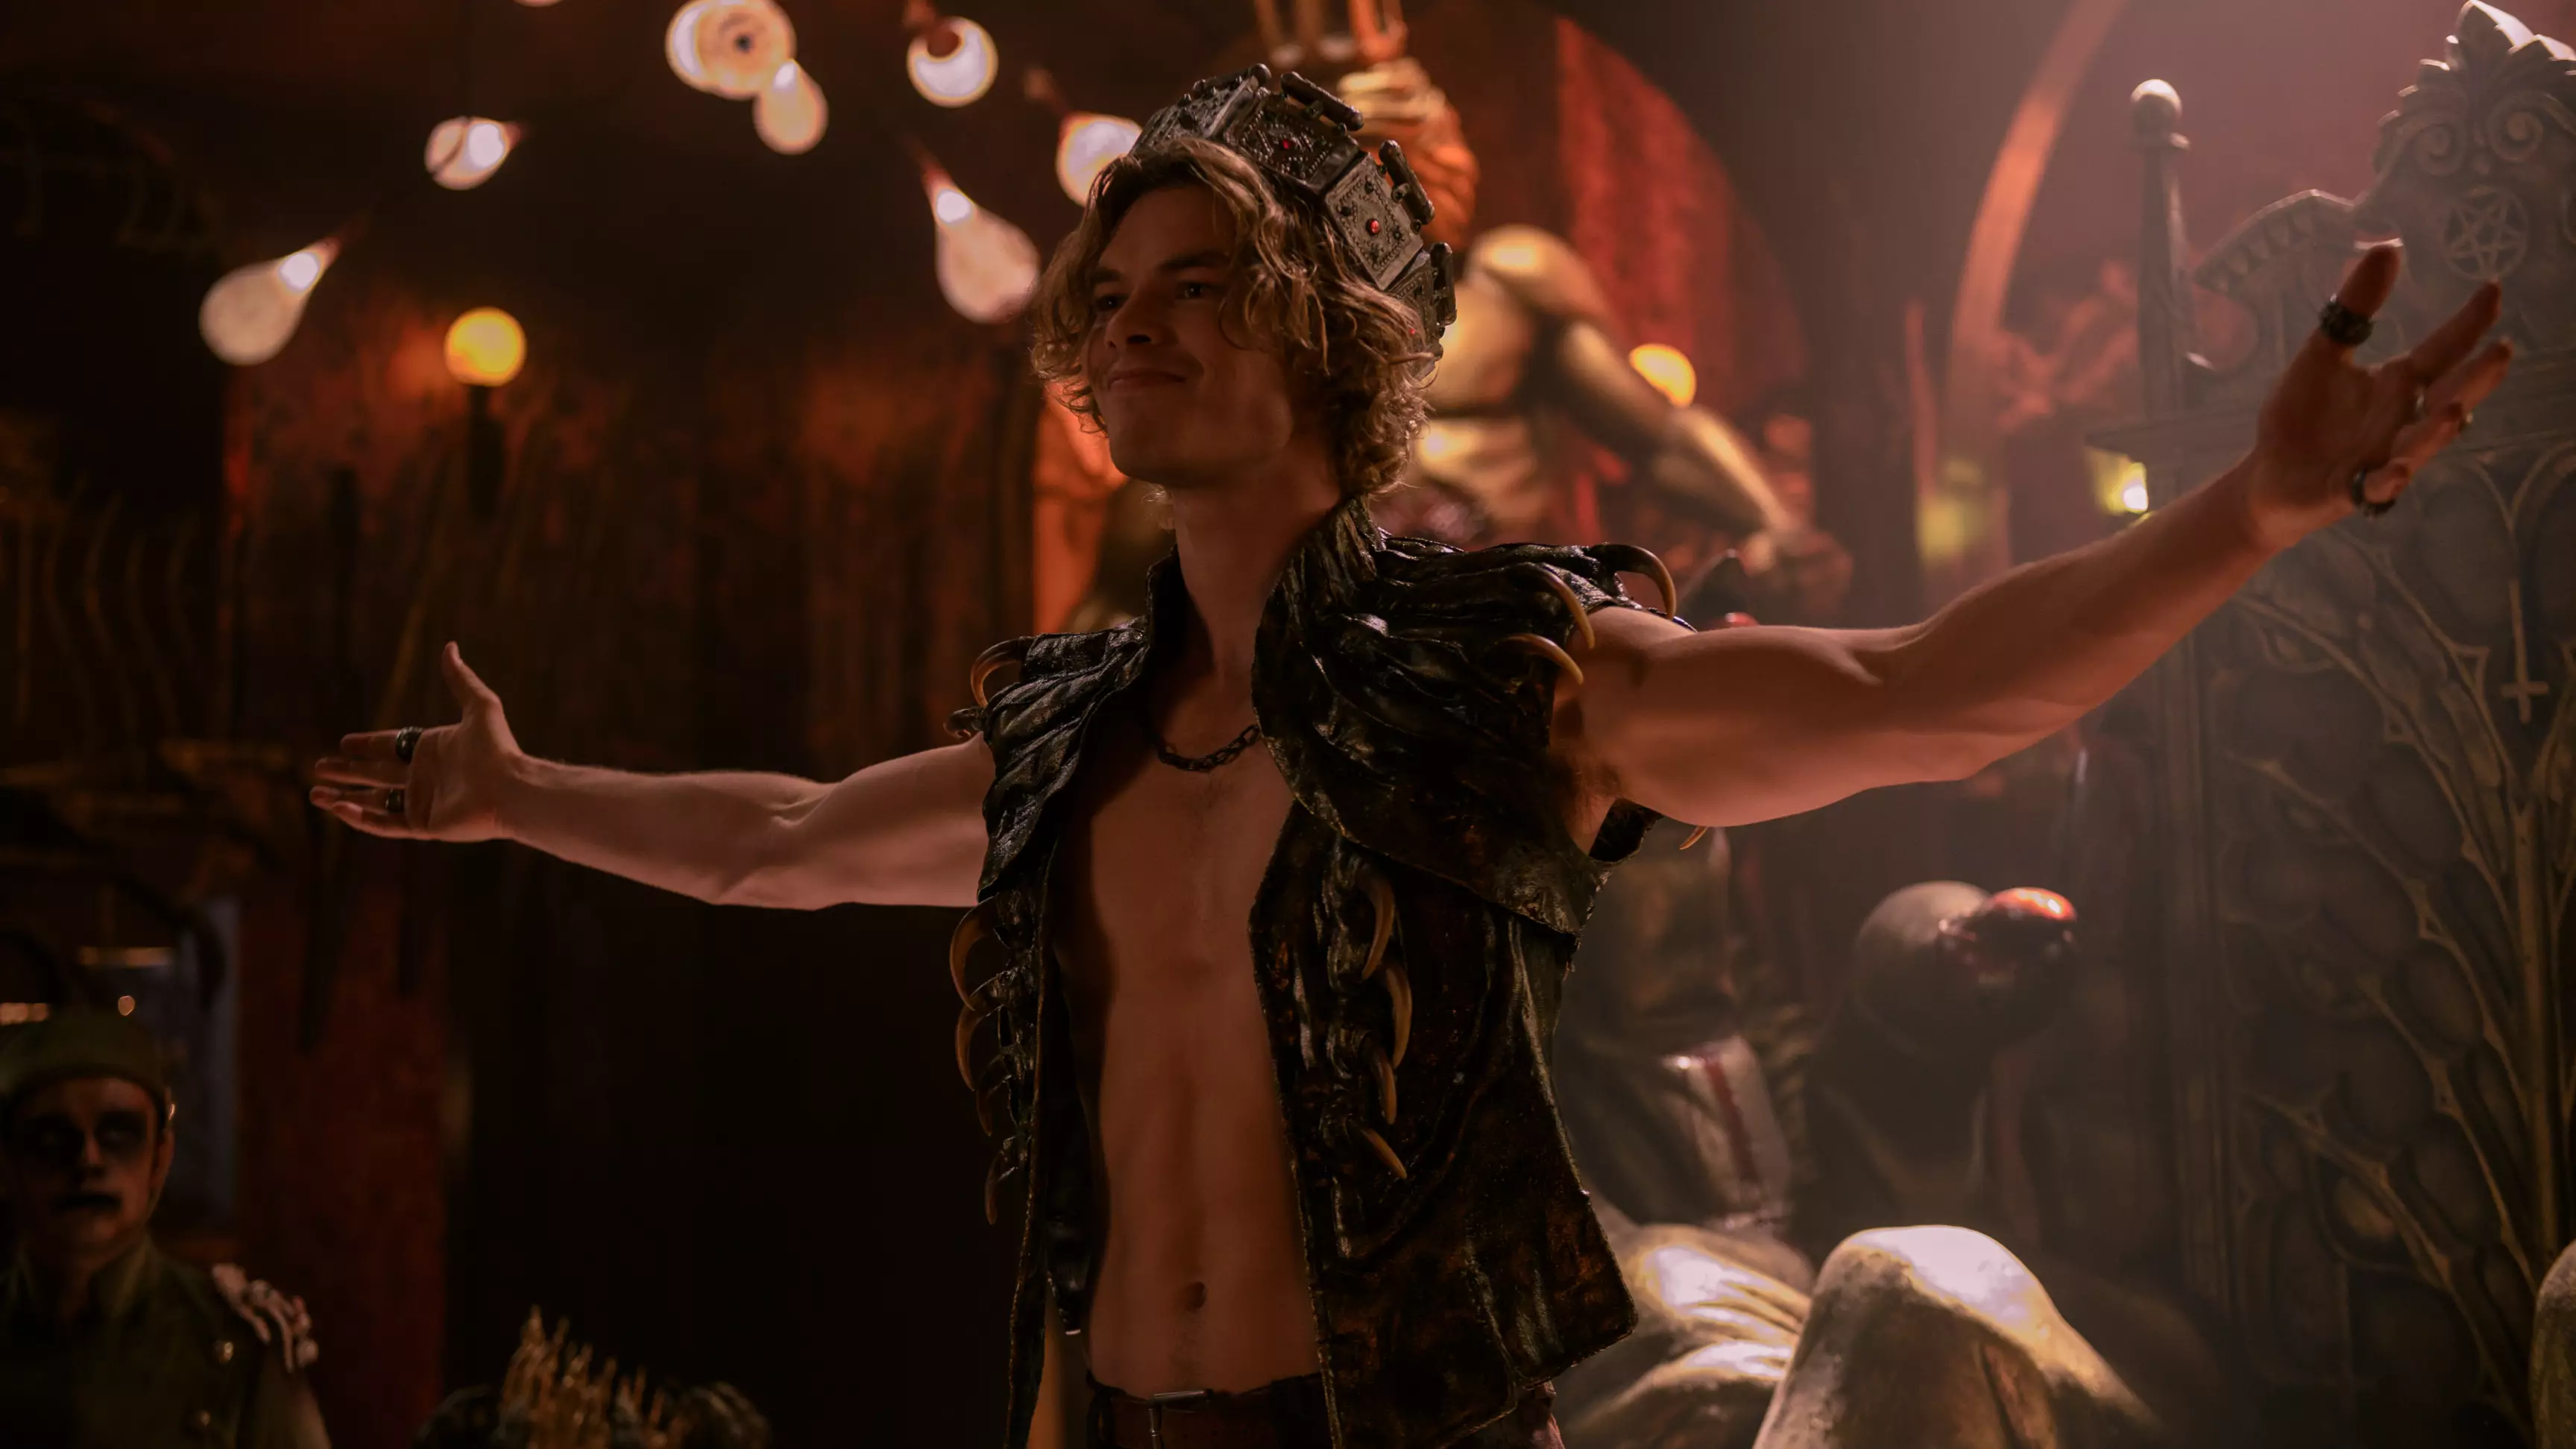 People Fancy Caliban From 'Chilling Adventures Of Sabrina'